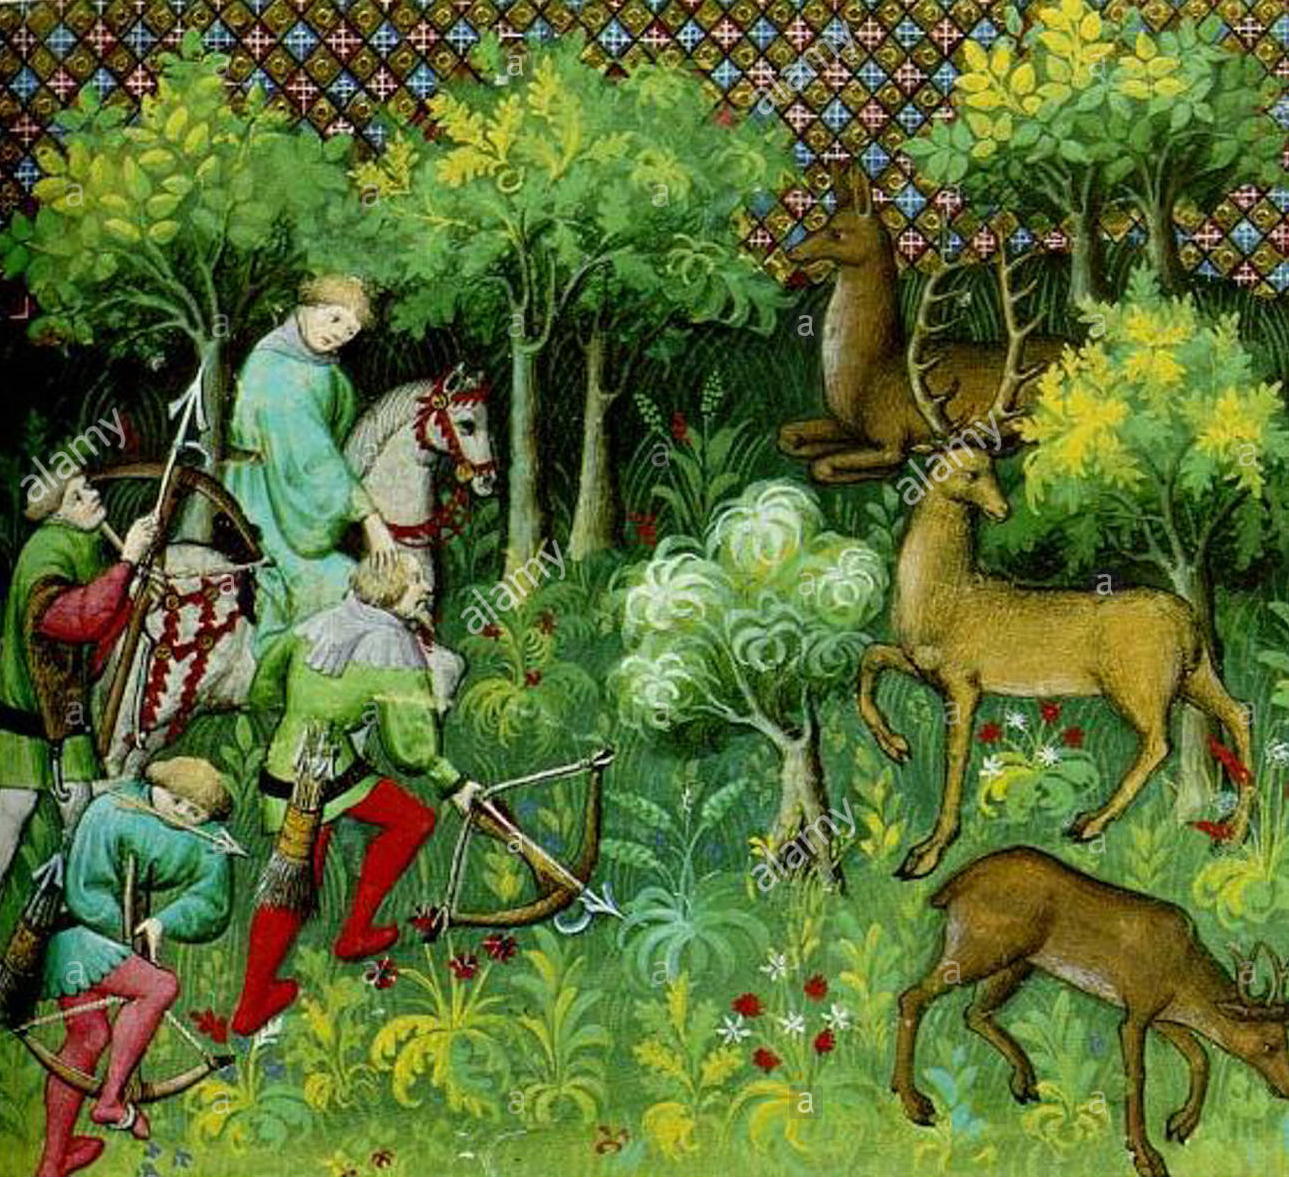 Bosque medieval.png